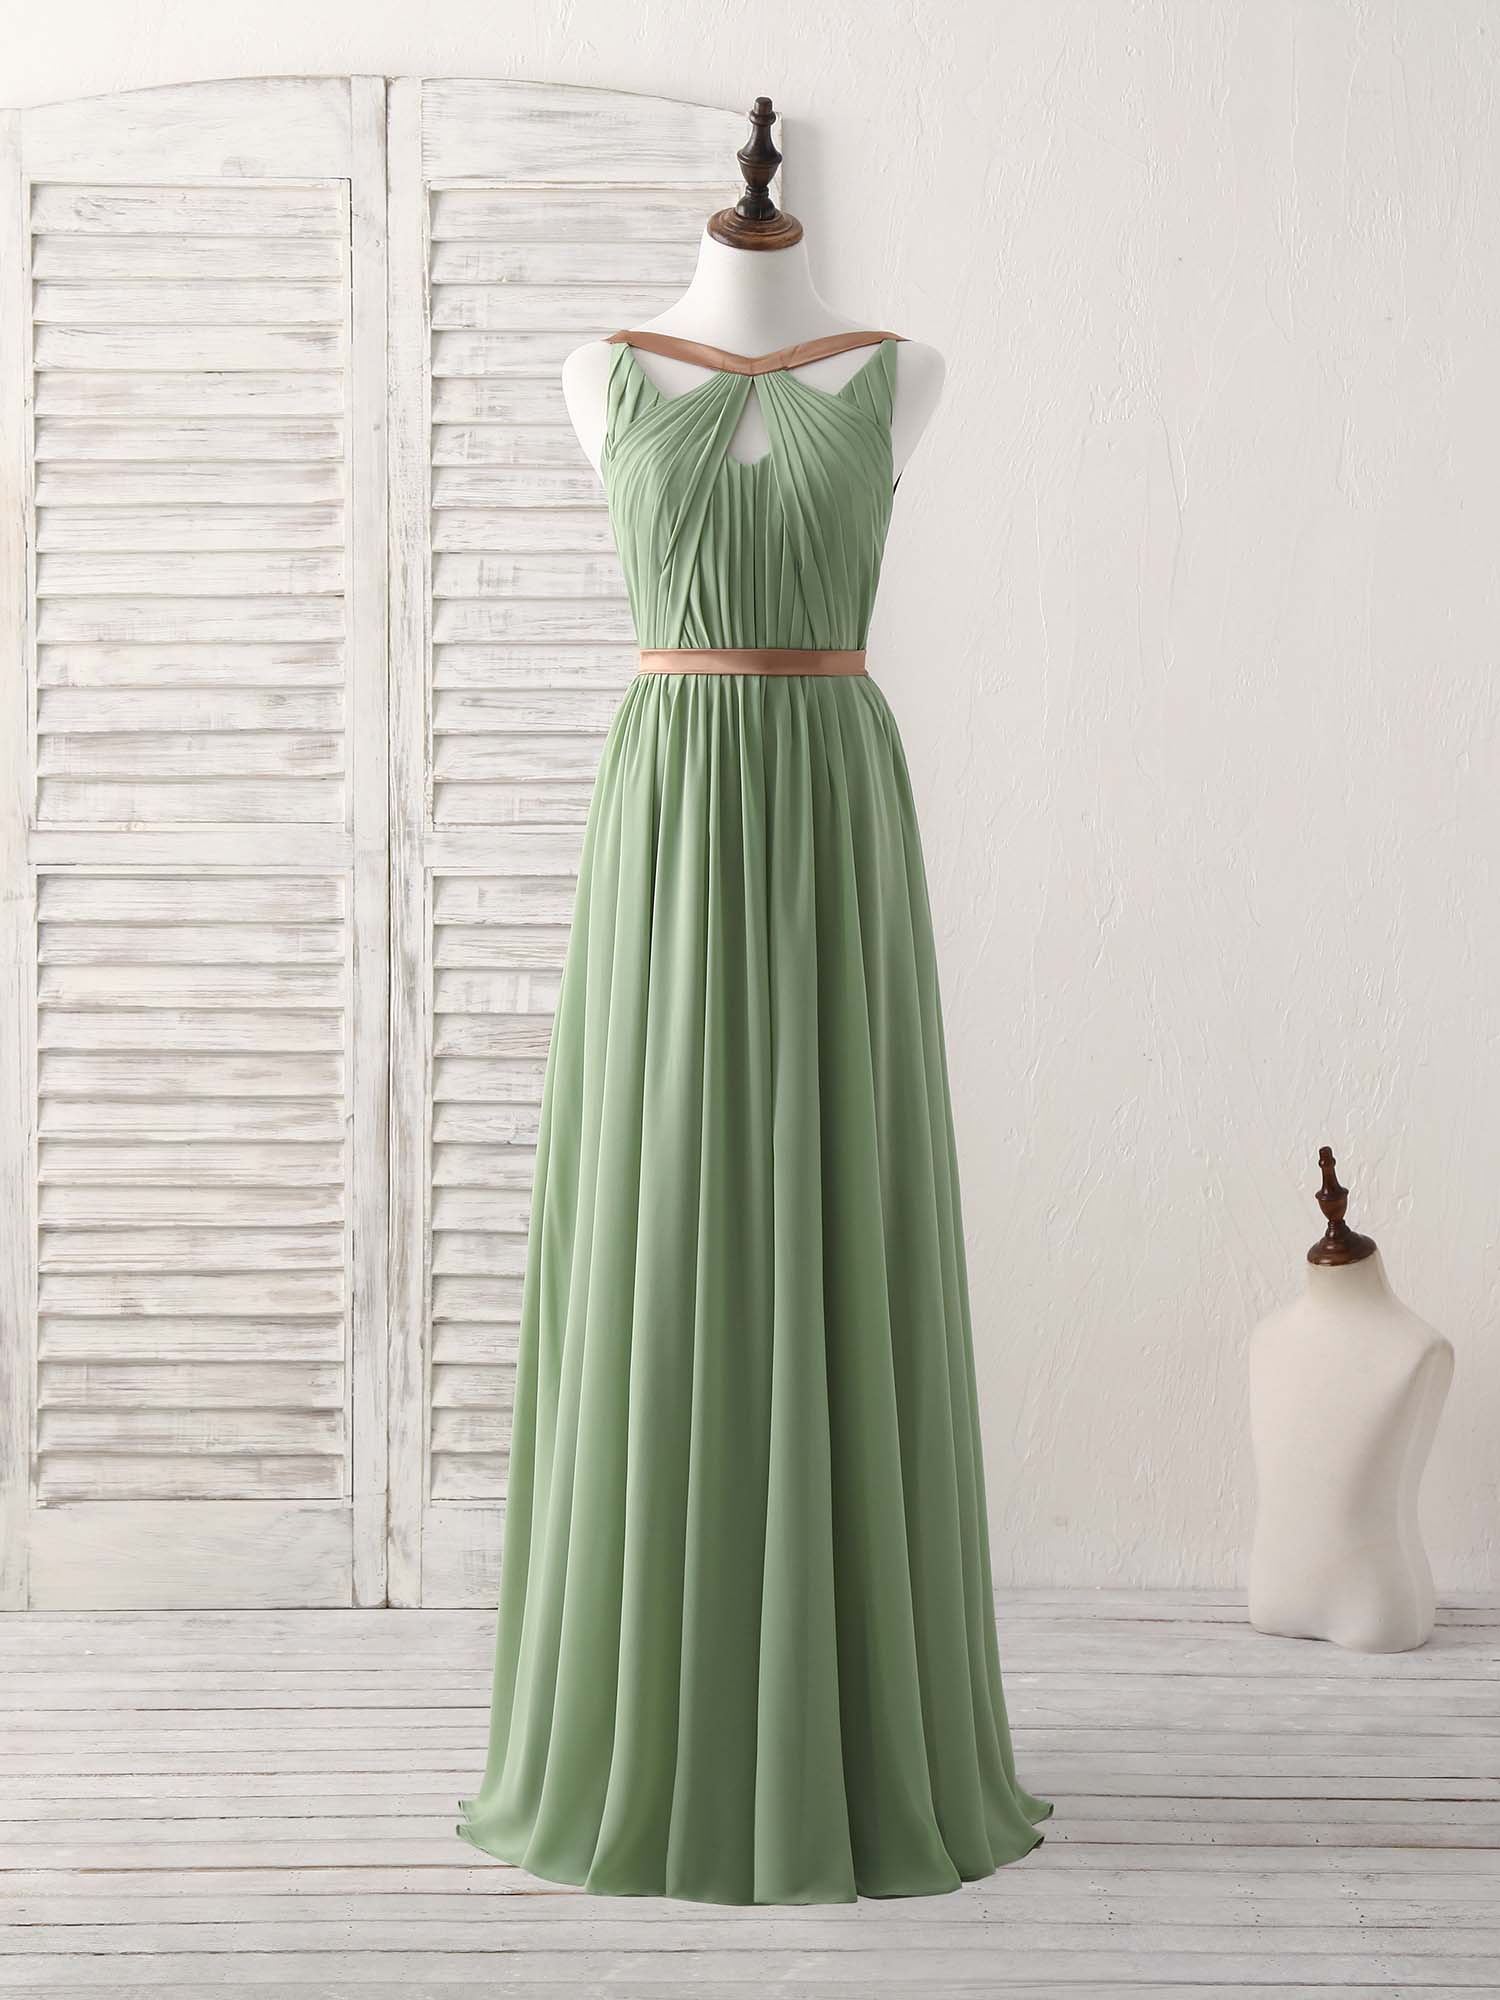 Party Outfit, Simple Green Chiffon Long Prom Dress, Green Bridesmaid Dress